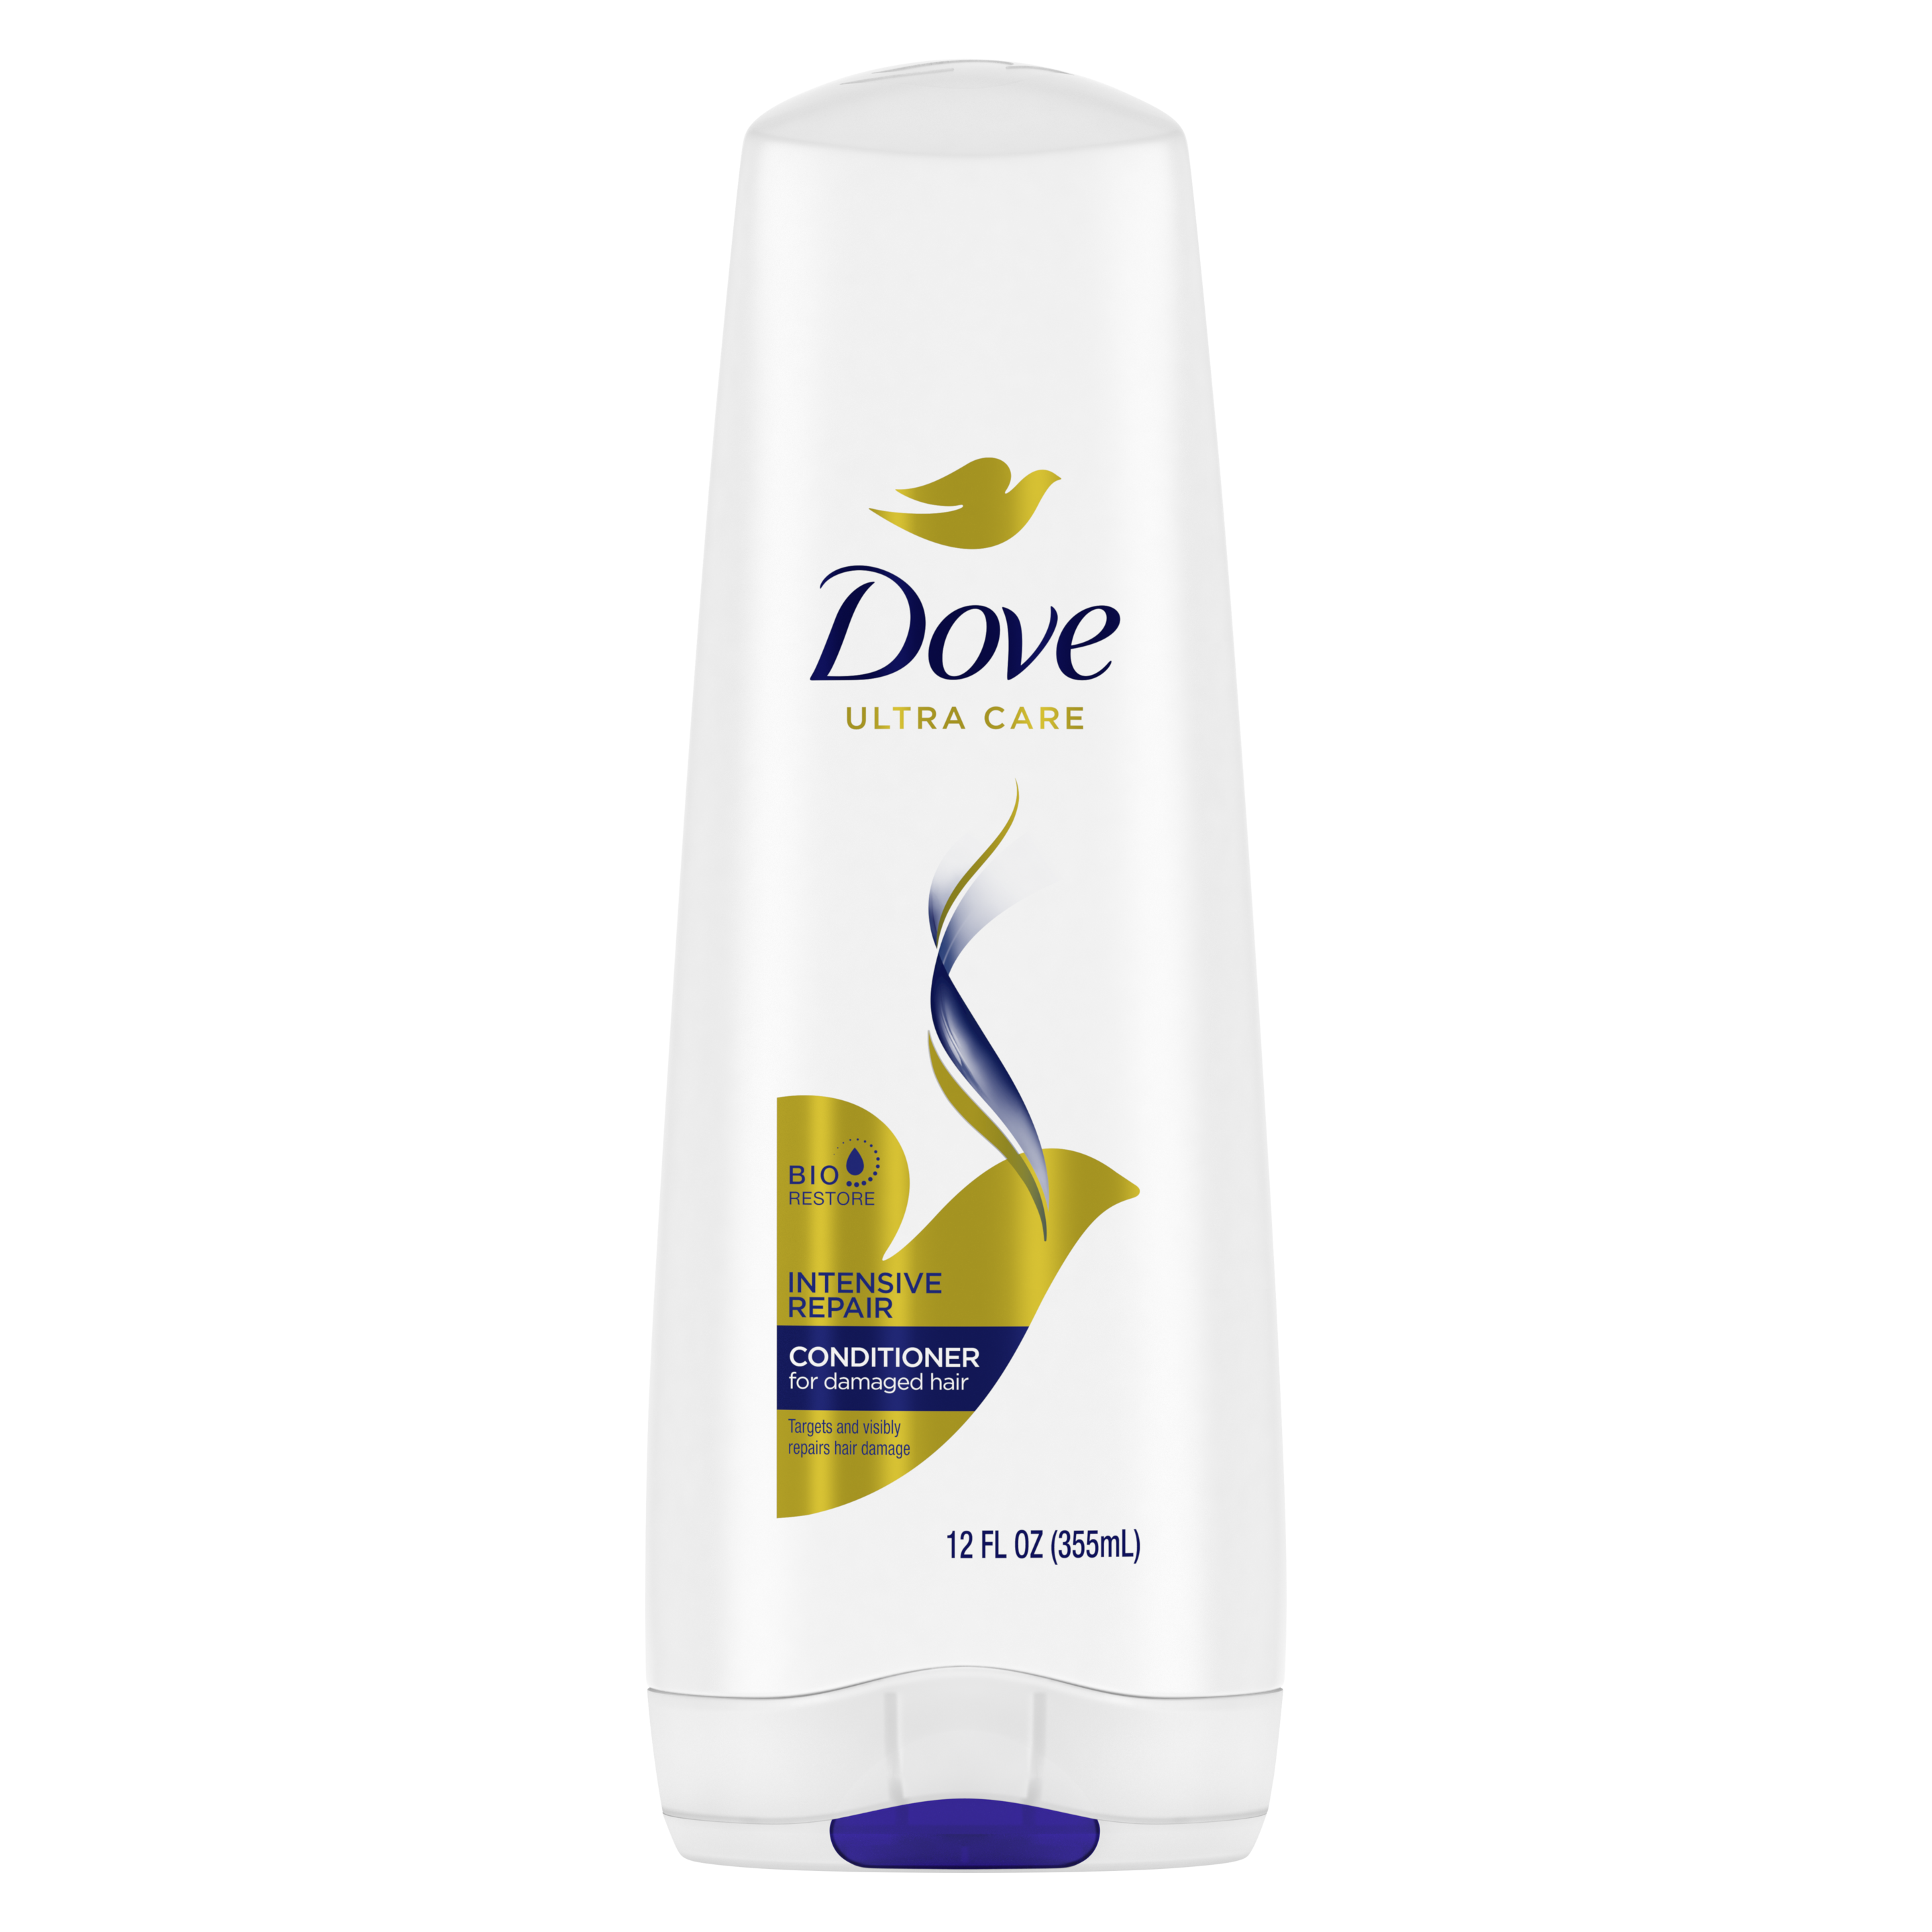 Dove Intensive Repair Conditioner For Dry-Damaged Hair 12 oz